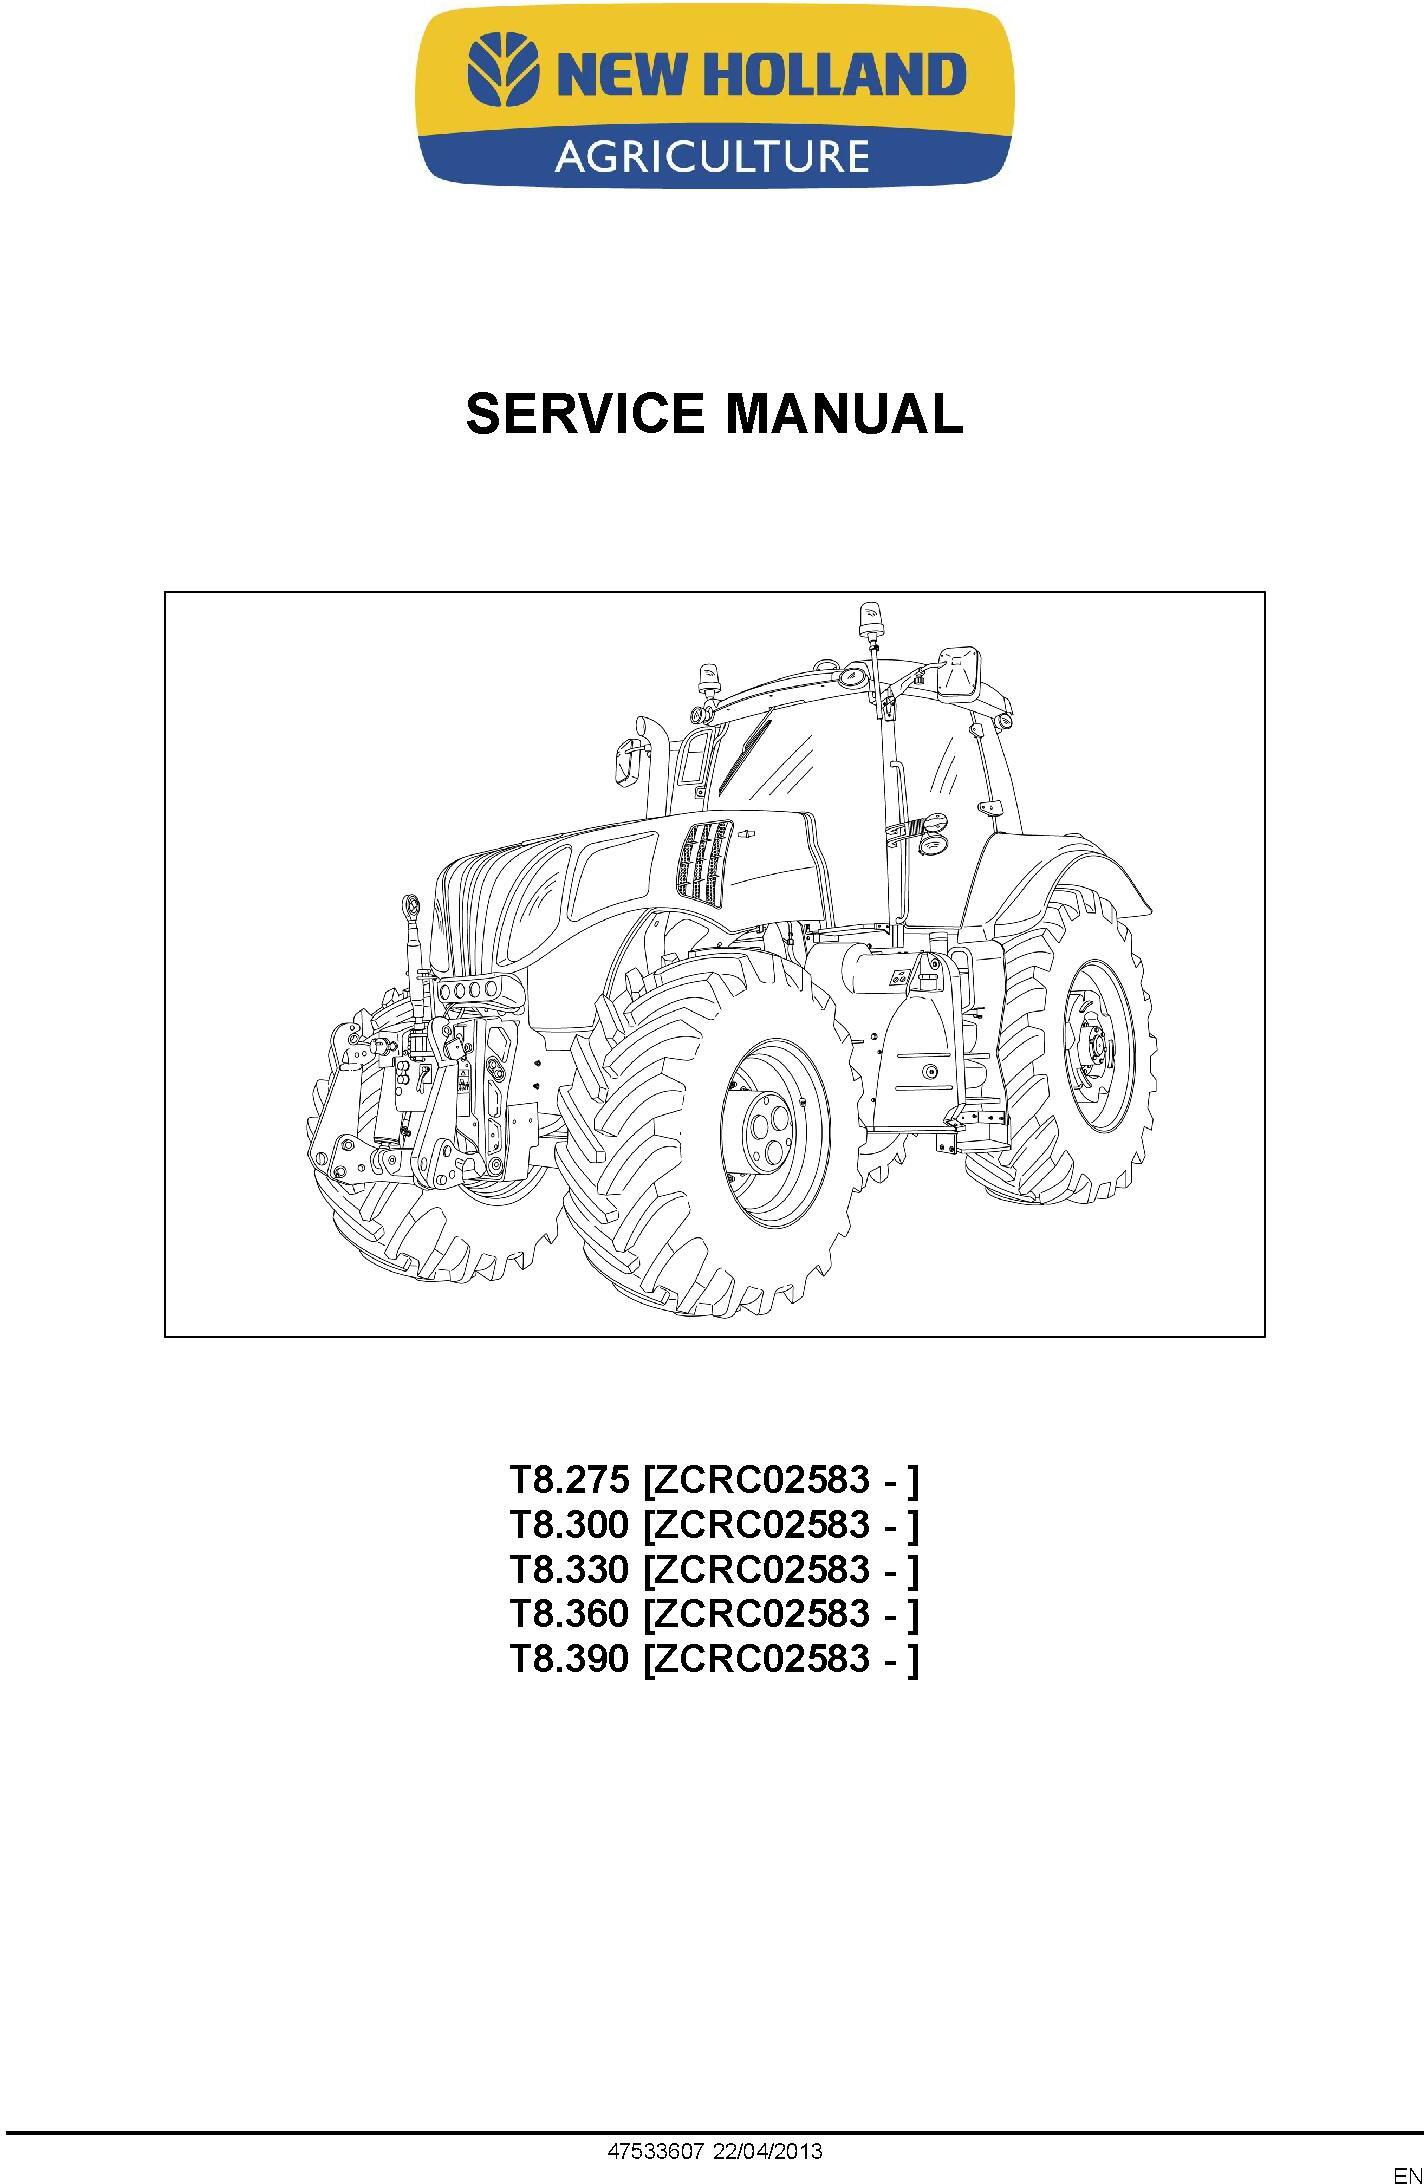 New Holland T8.275, T8.300, T8.330, T8.360, T8.390 (PST) Tractor (PIN ZCRC02583-) Service Manual - 1